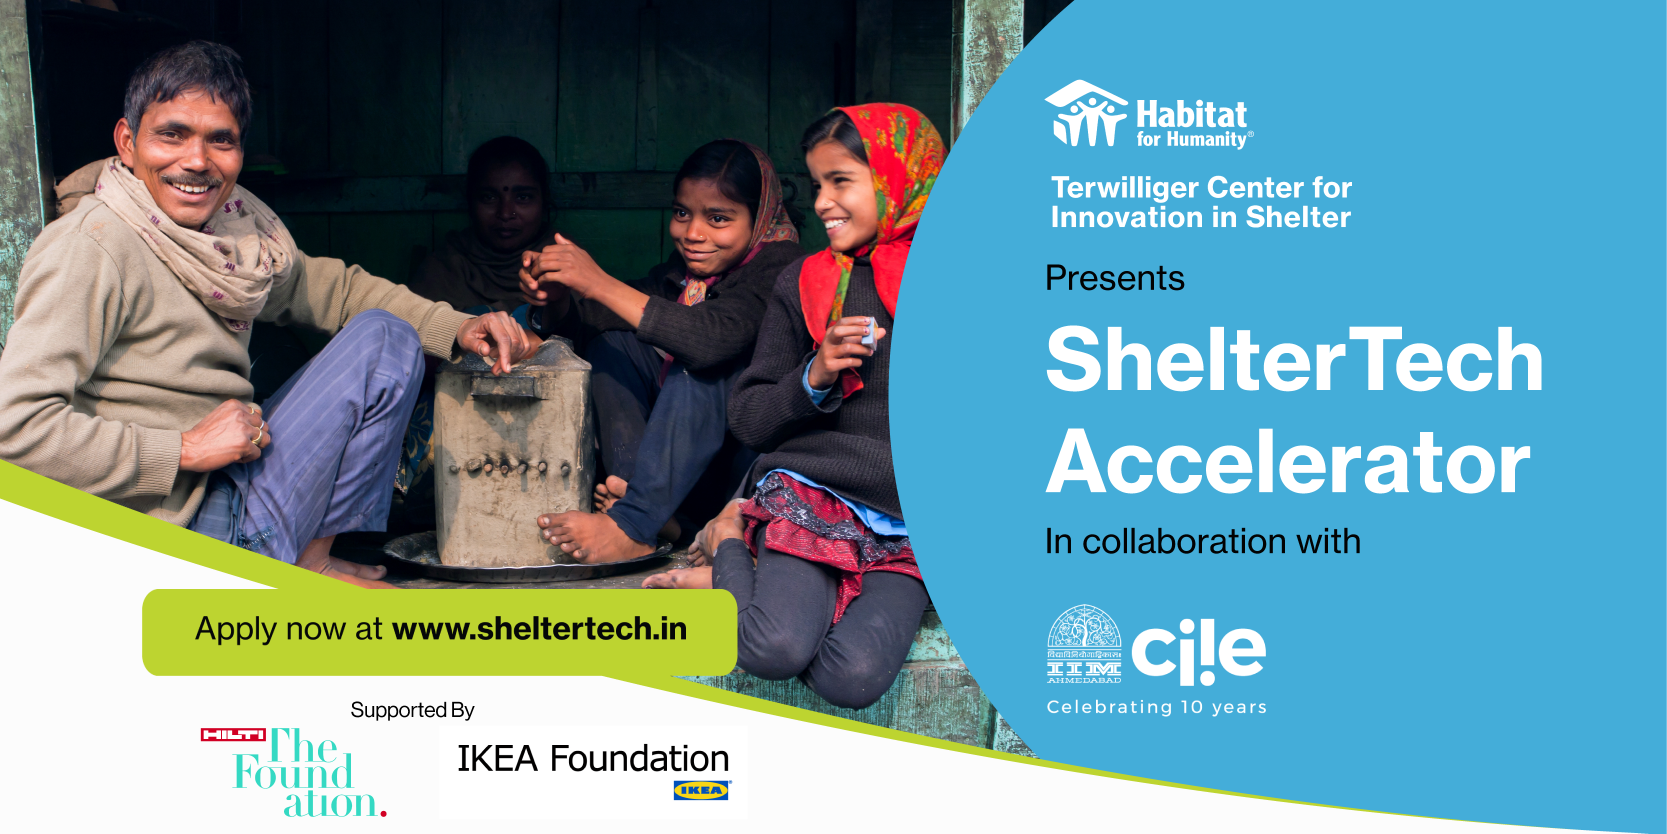 ShelterTech Accelerator’s phase 2 invites applications from startups to solve India’s housing challenges